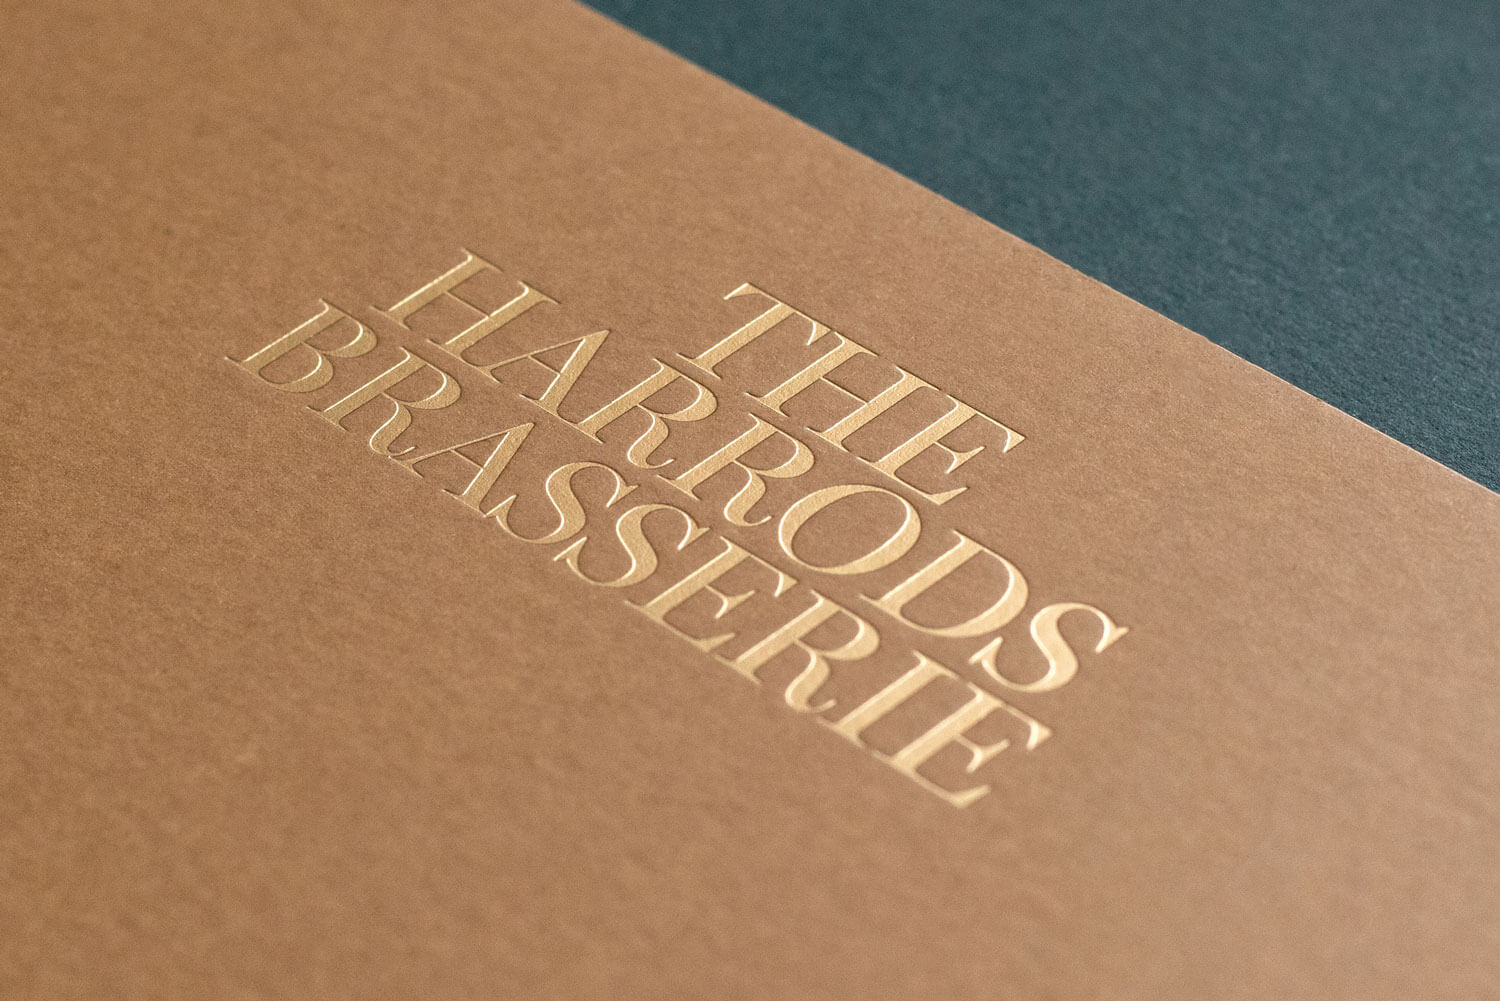 a high end gold foiled logo printed on a restaurant menu saying the harrods brasserie